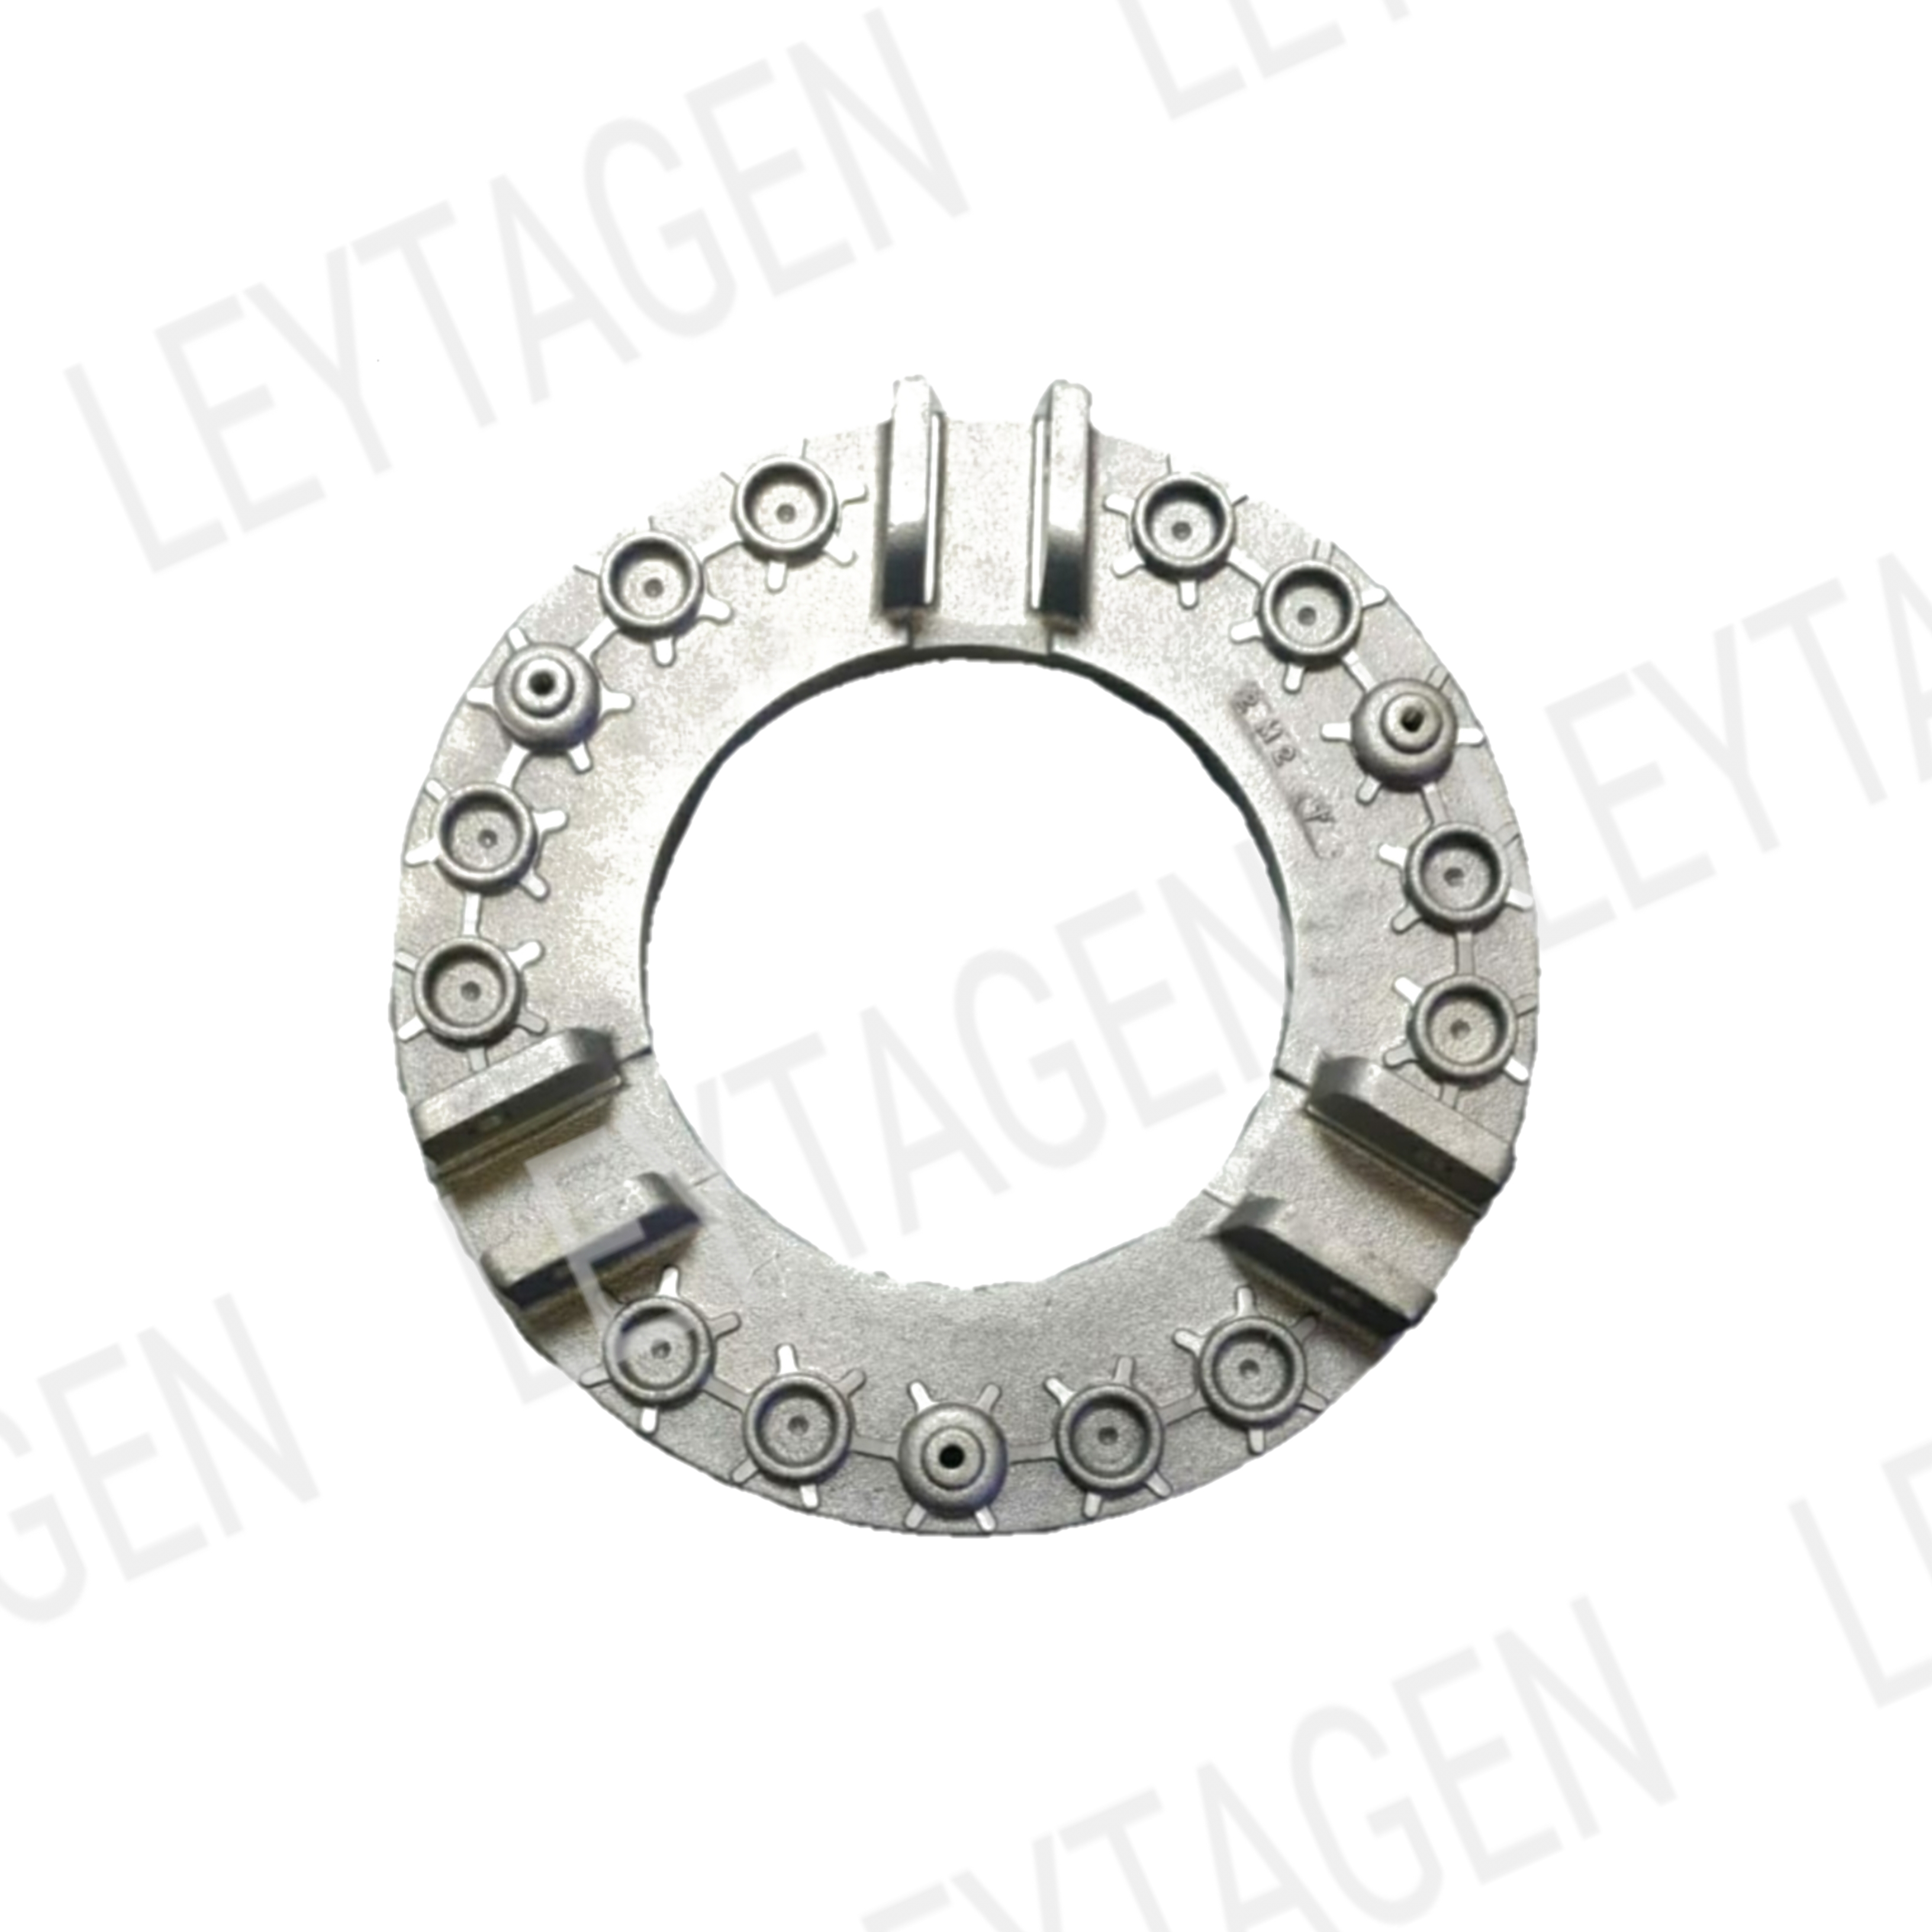 GBS 600 PRESSURE PLATE WITH BEARING (LG/CAK352/PPWB/021)